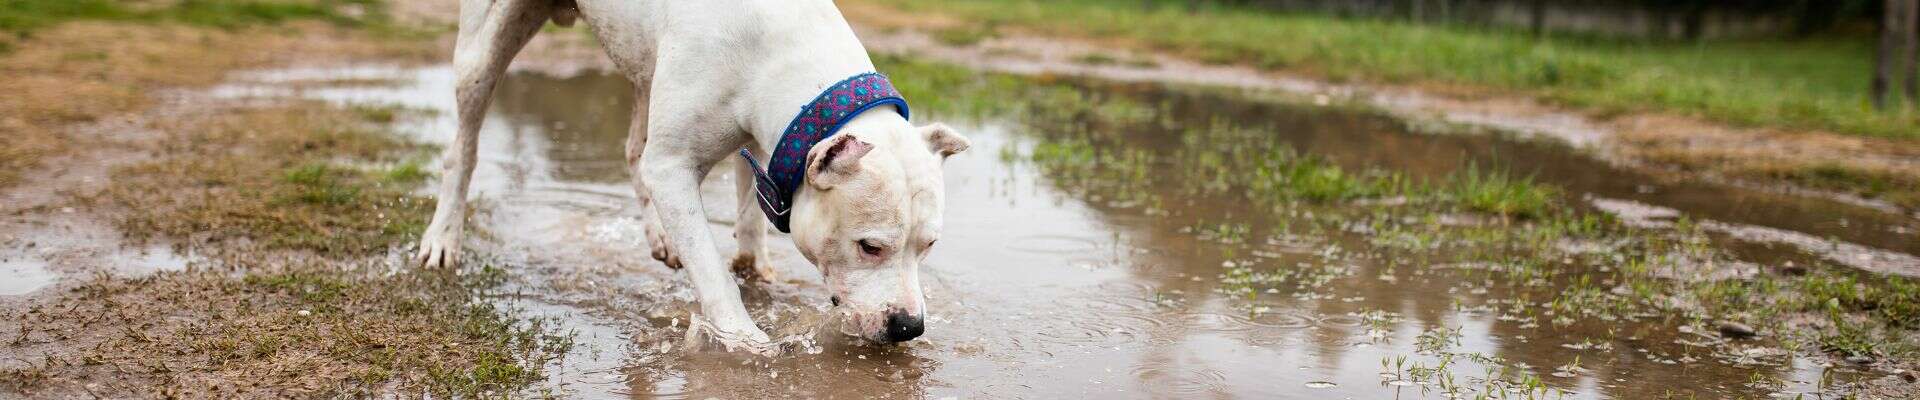 A white dog playing in the mud